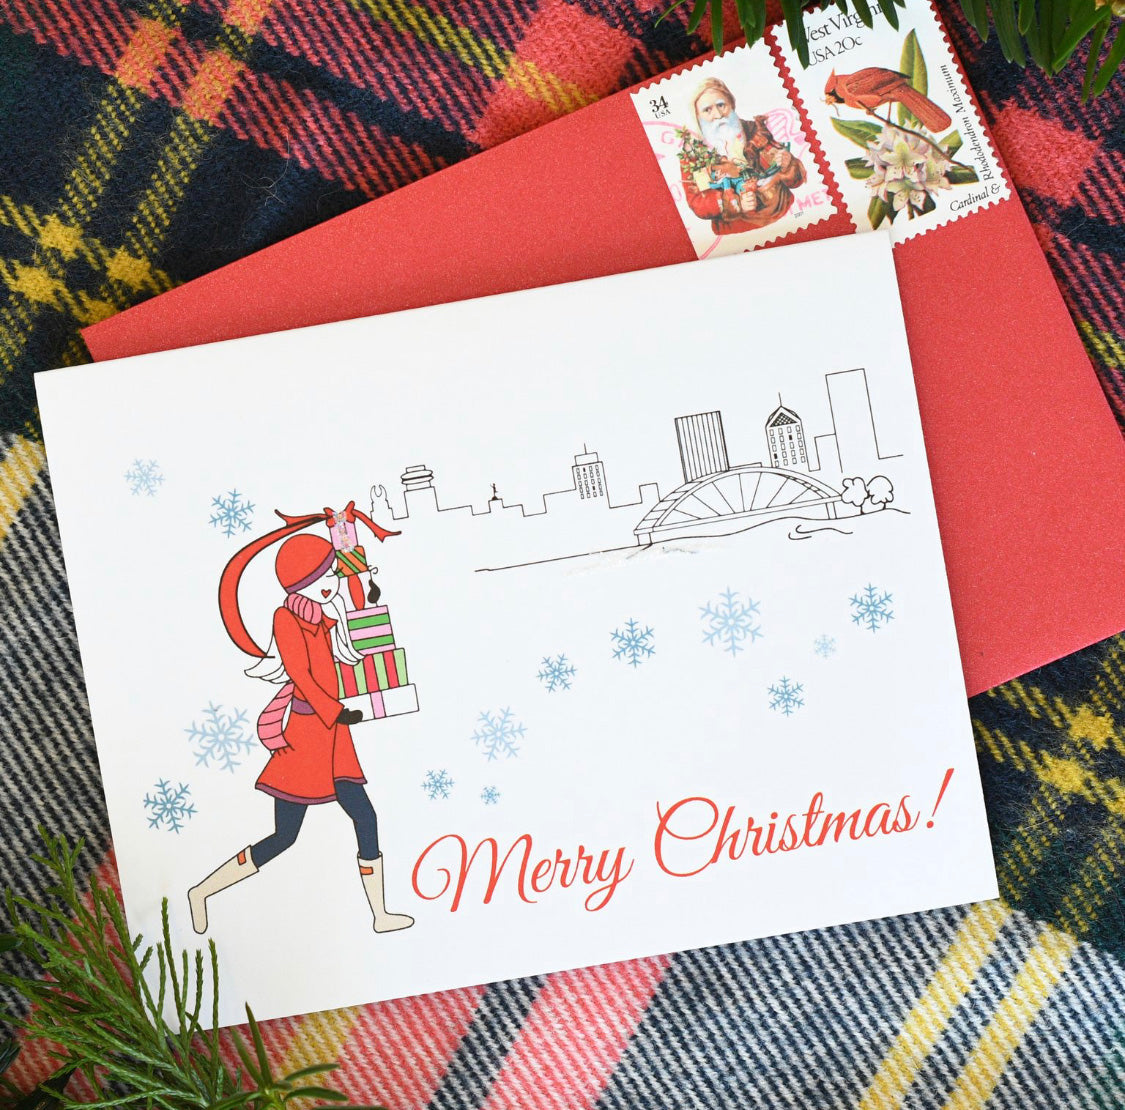 Merry Christmas Rochester Greeting Card